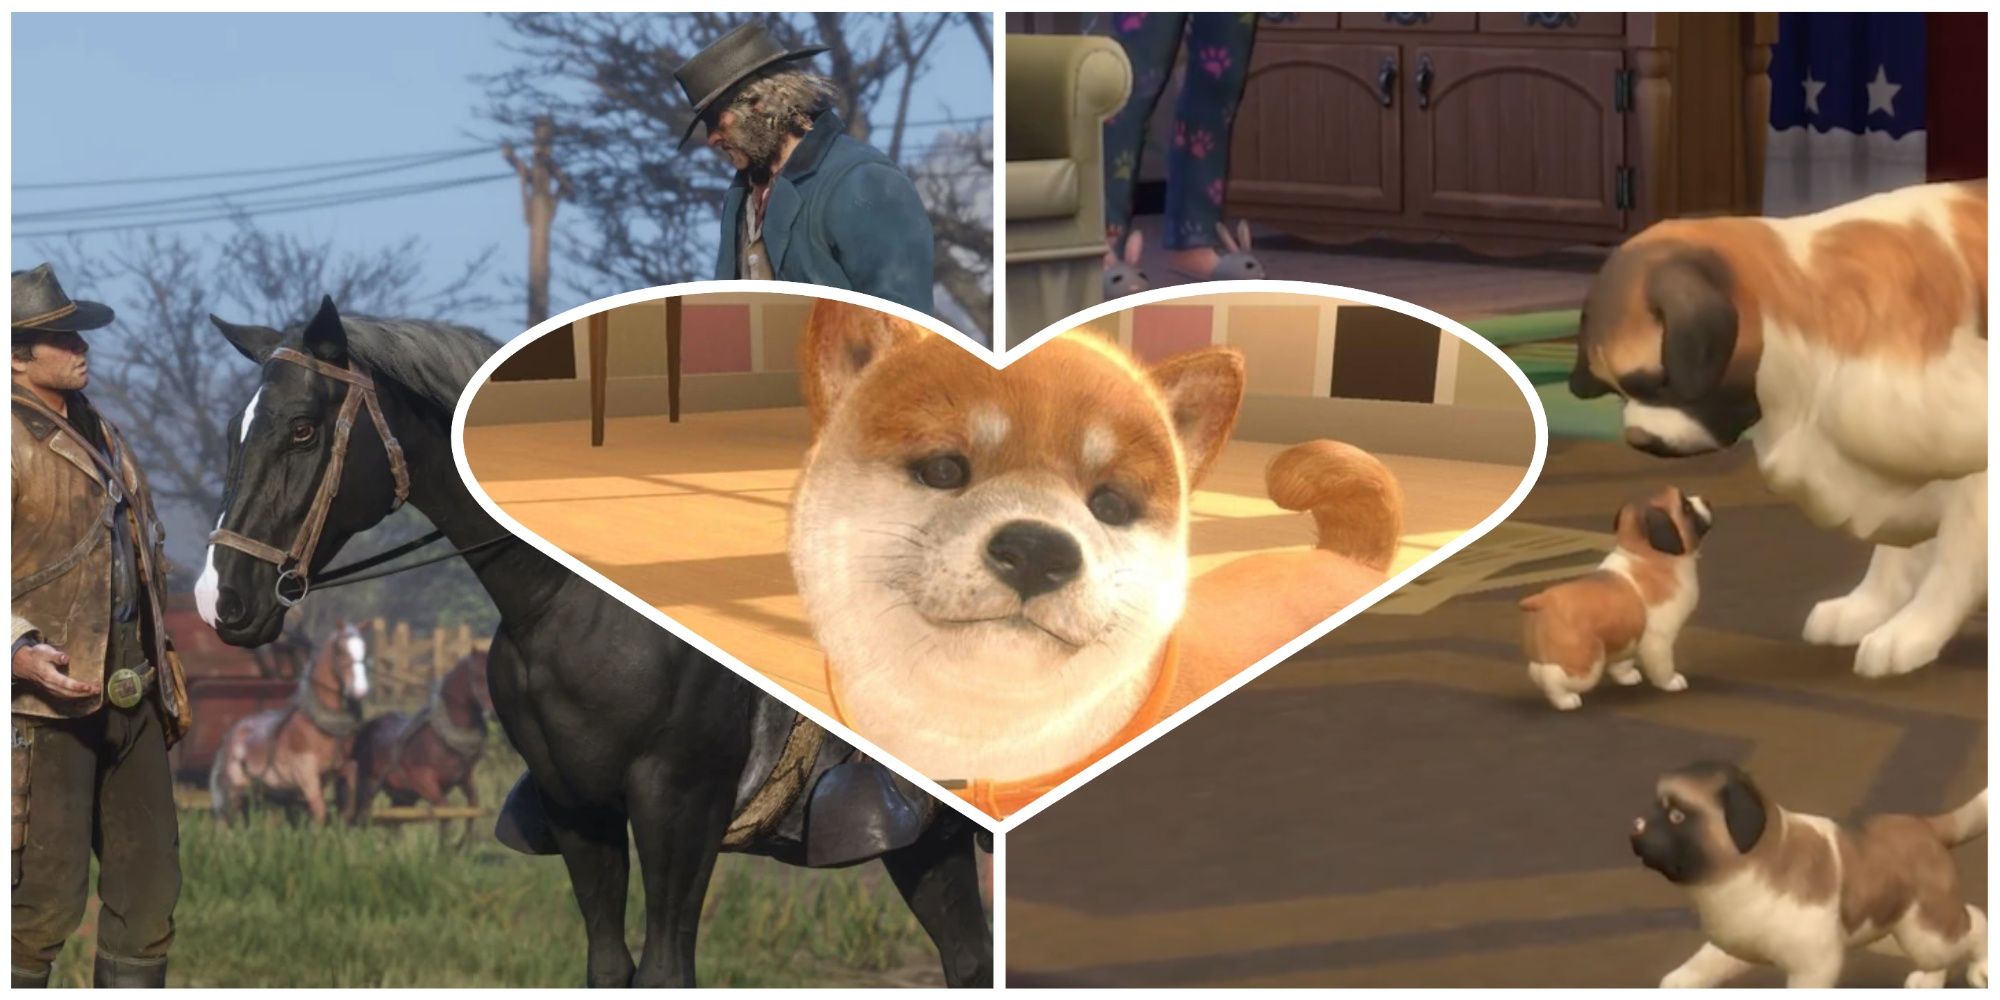 A collage featuring animals in video games: Red Dead Redemption 2 (left), Nintendogs (middle), and Sims 4 (right)